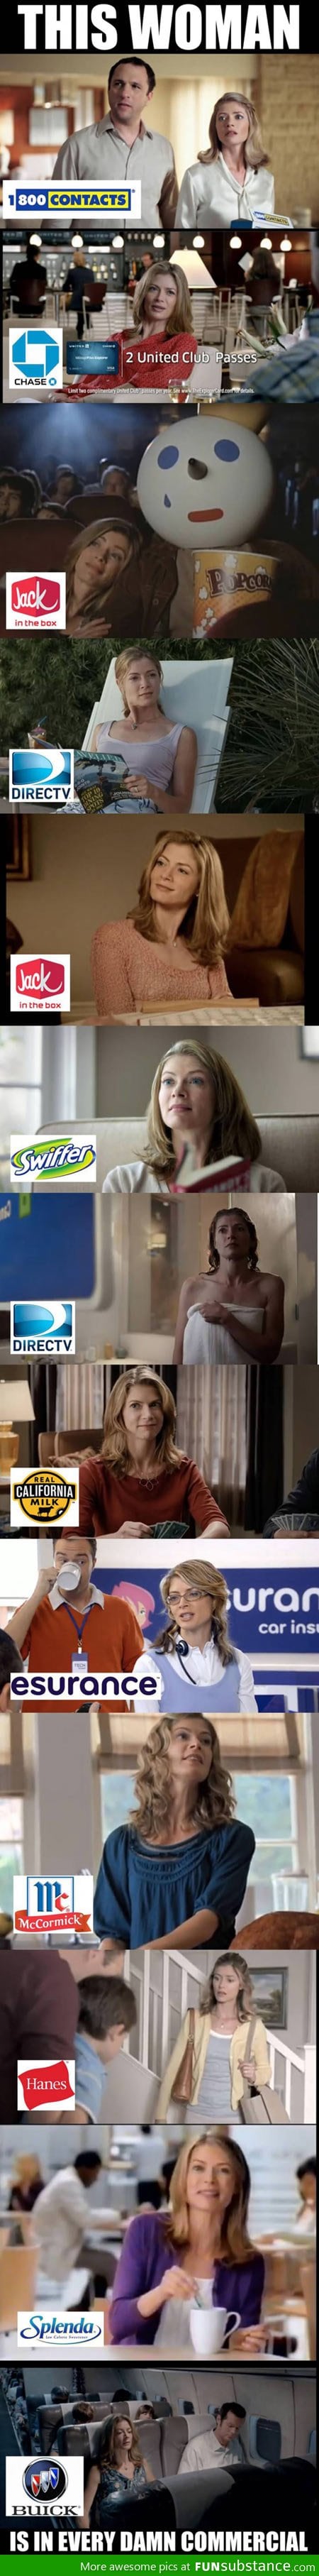 She's in every commercial